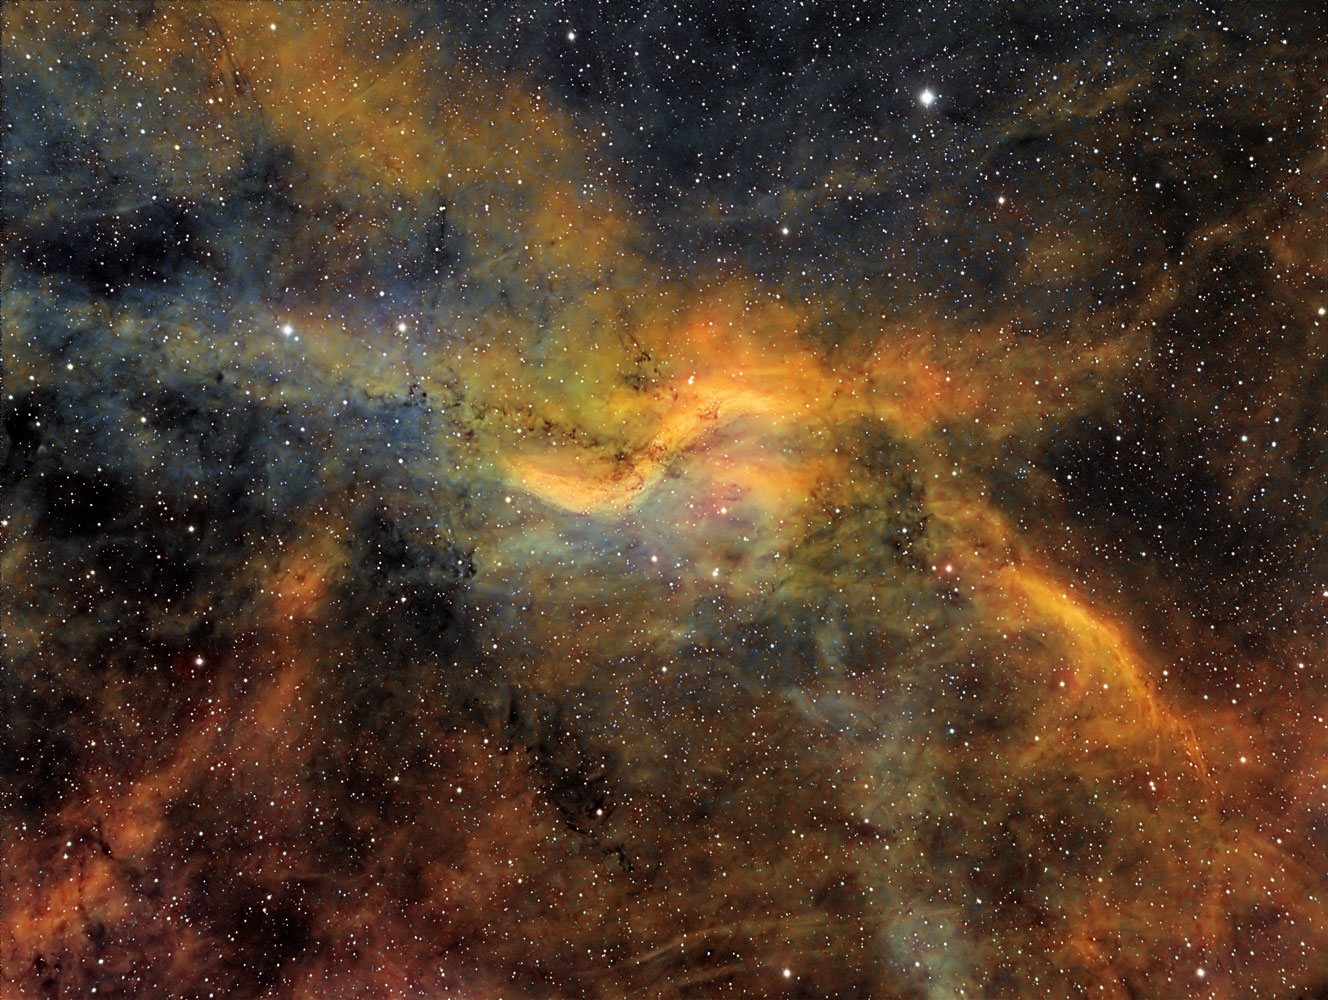 Propeller Nebula in Cygnus, also known as DWB111, on May 1, 2014.